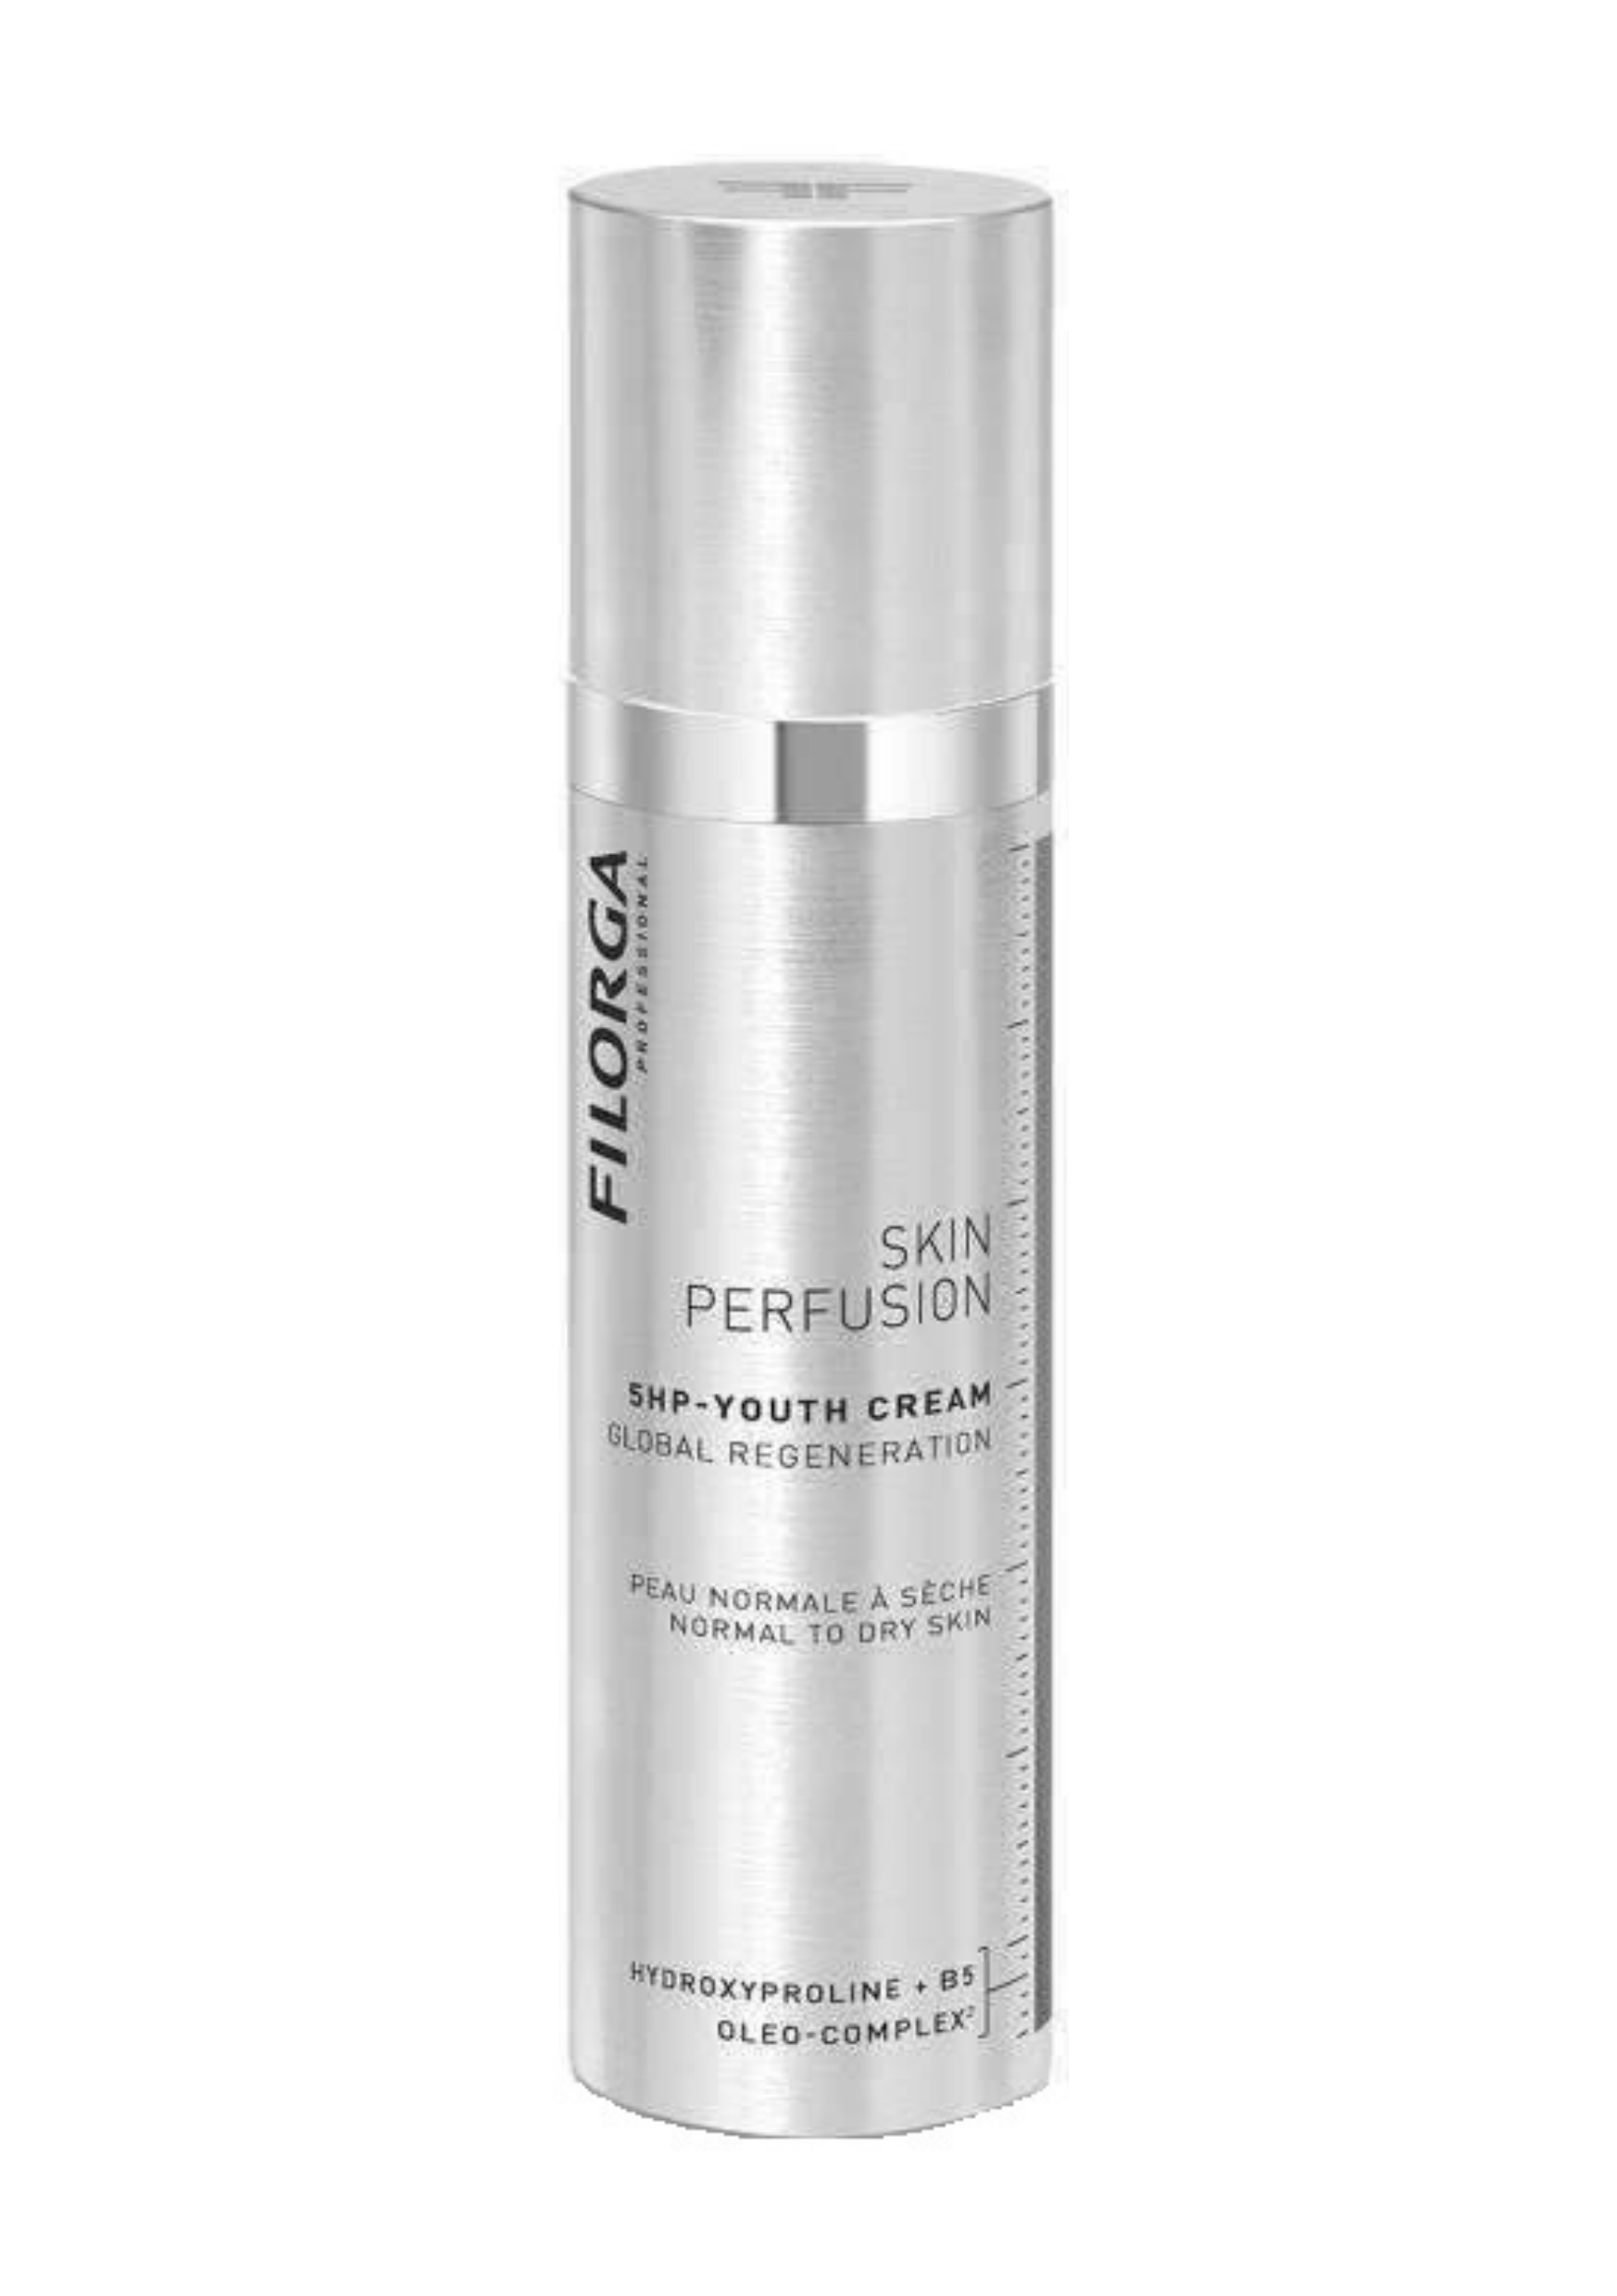 Skin Perfusion 5HP-Youth Cream